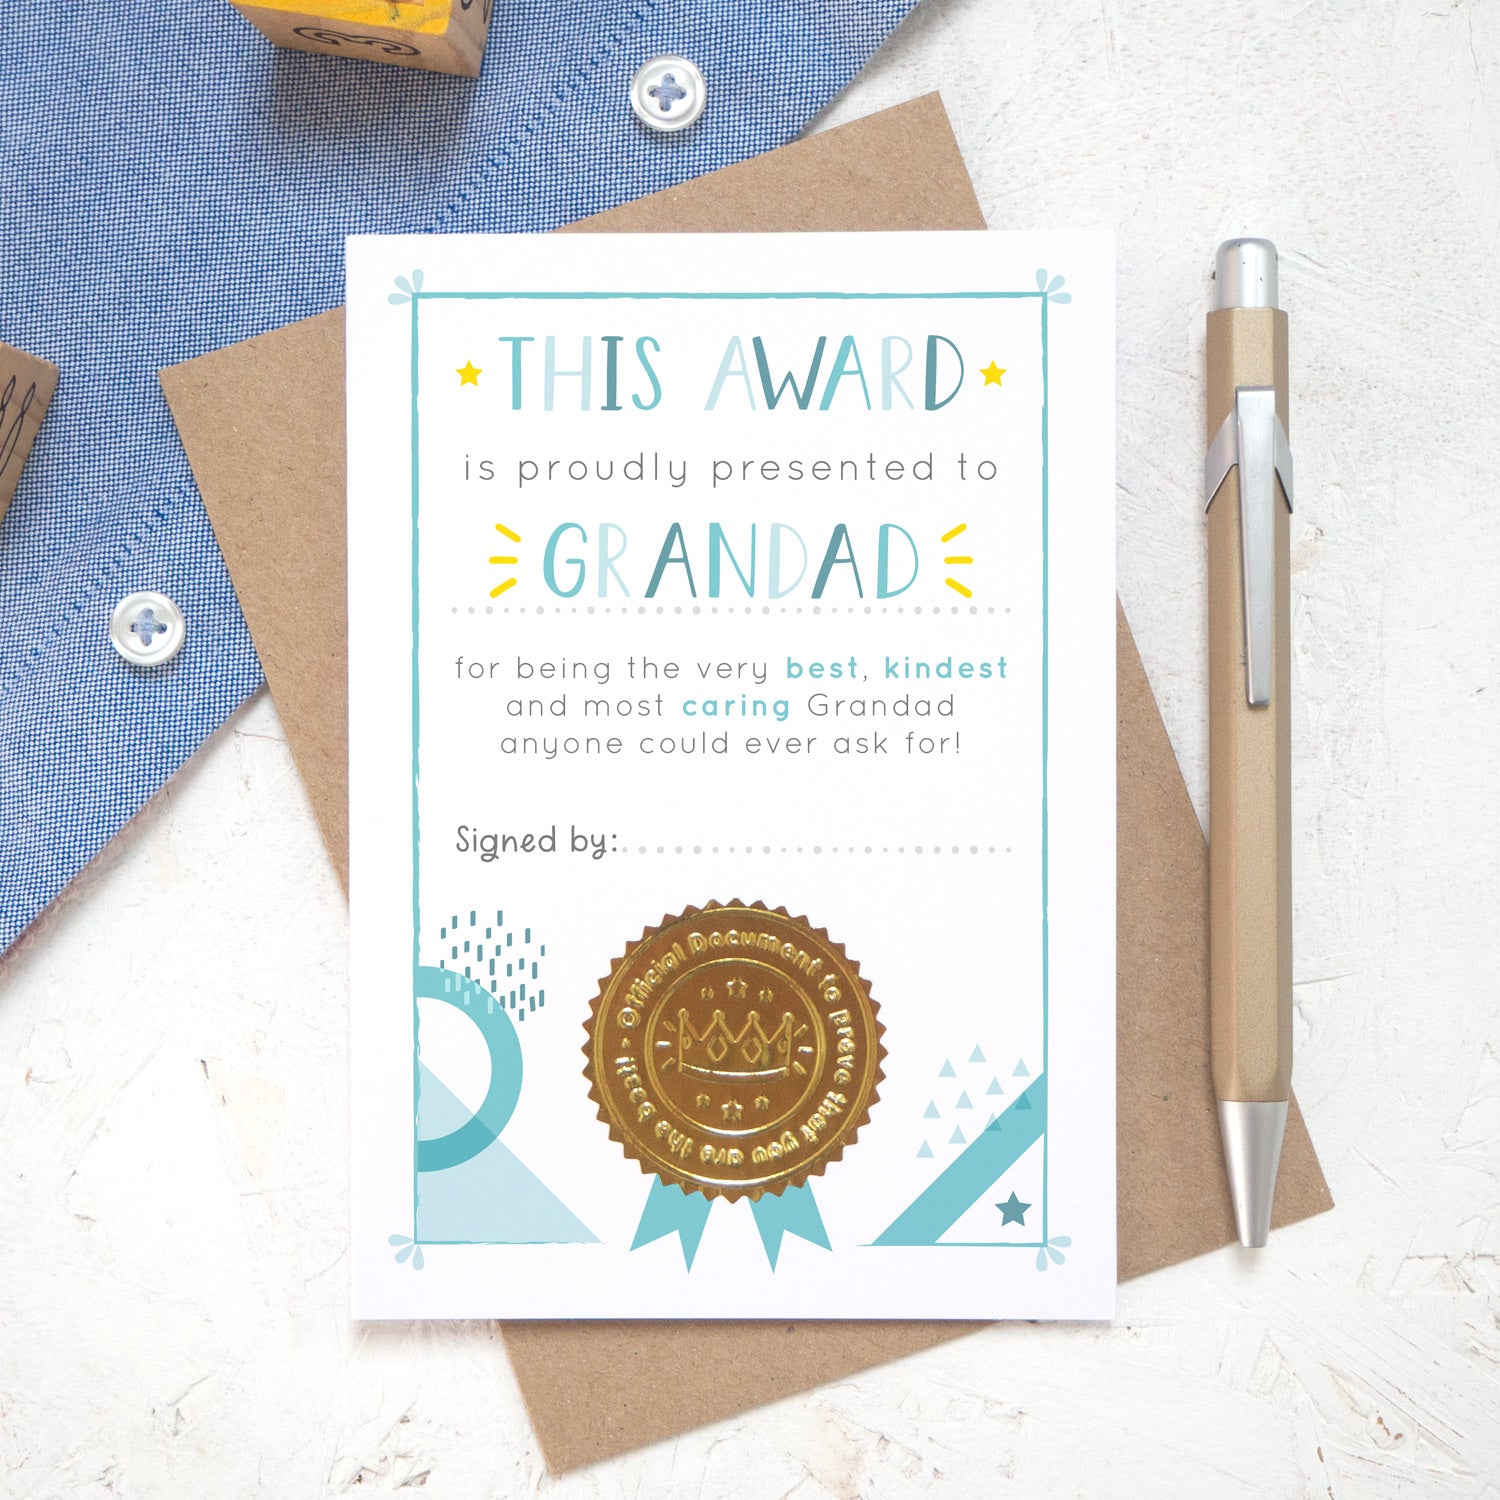 A Grandad certificate award card printed onto white card in varying tones of blue and pops of yellow! Each card features a shiny gold seal to make it official! Photographed on a white background with a hint of a blue shirt and a brown kraft envelope.